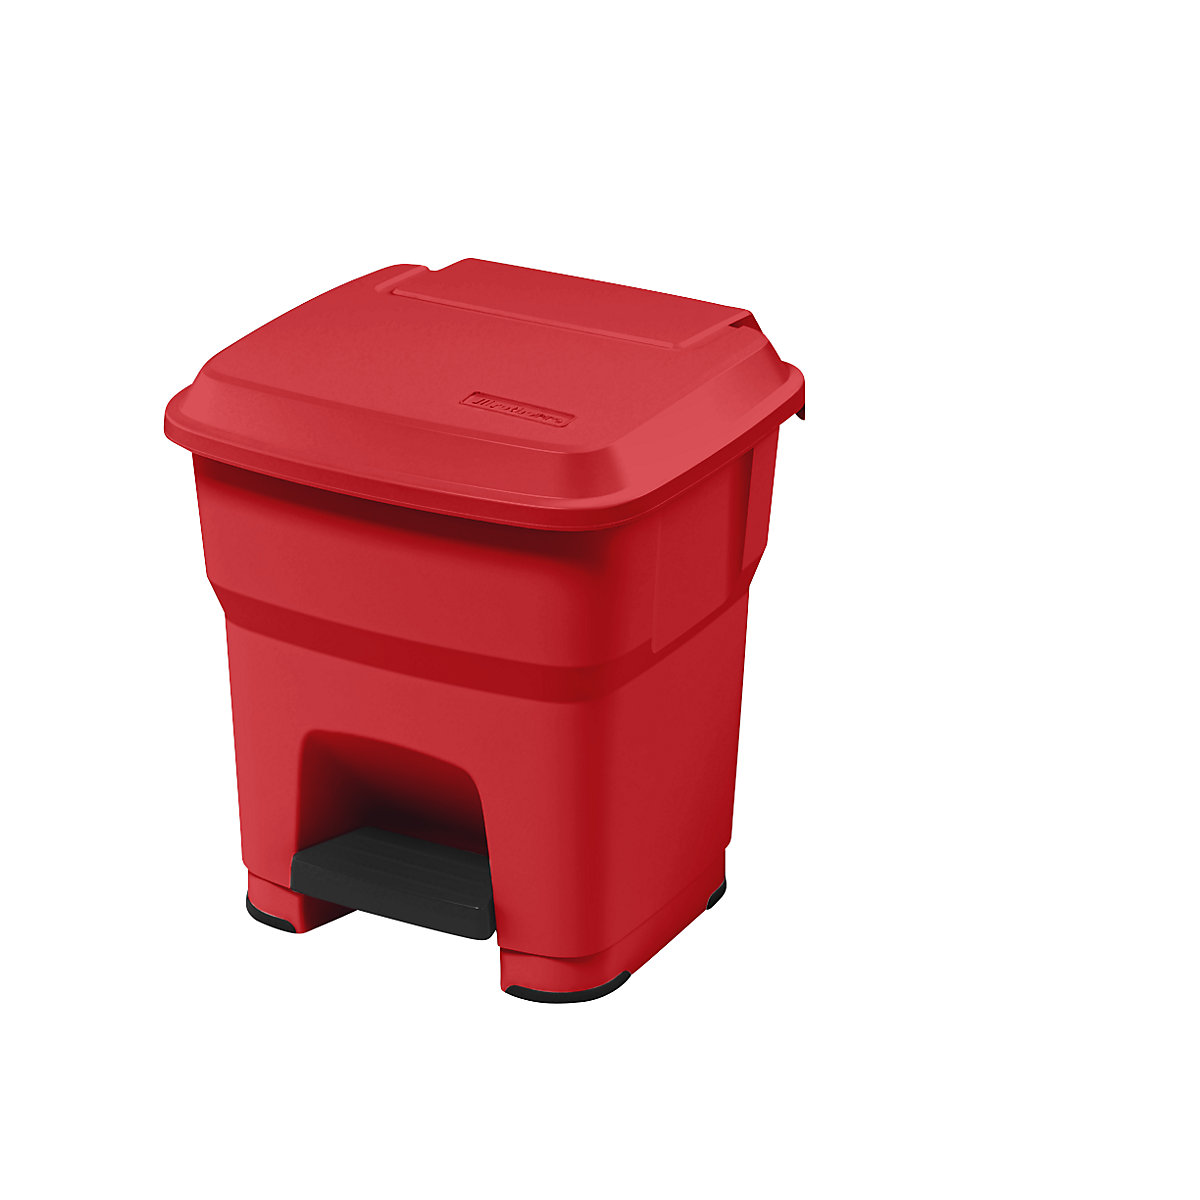 rothopro – HERA waste collector with pedal, capacity 35 l, WxHxD 390 x 440 x 390 mm, red